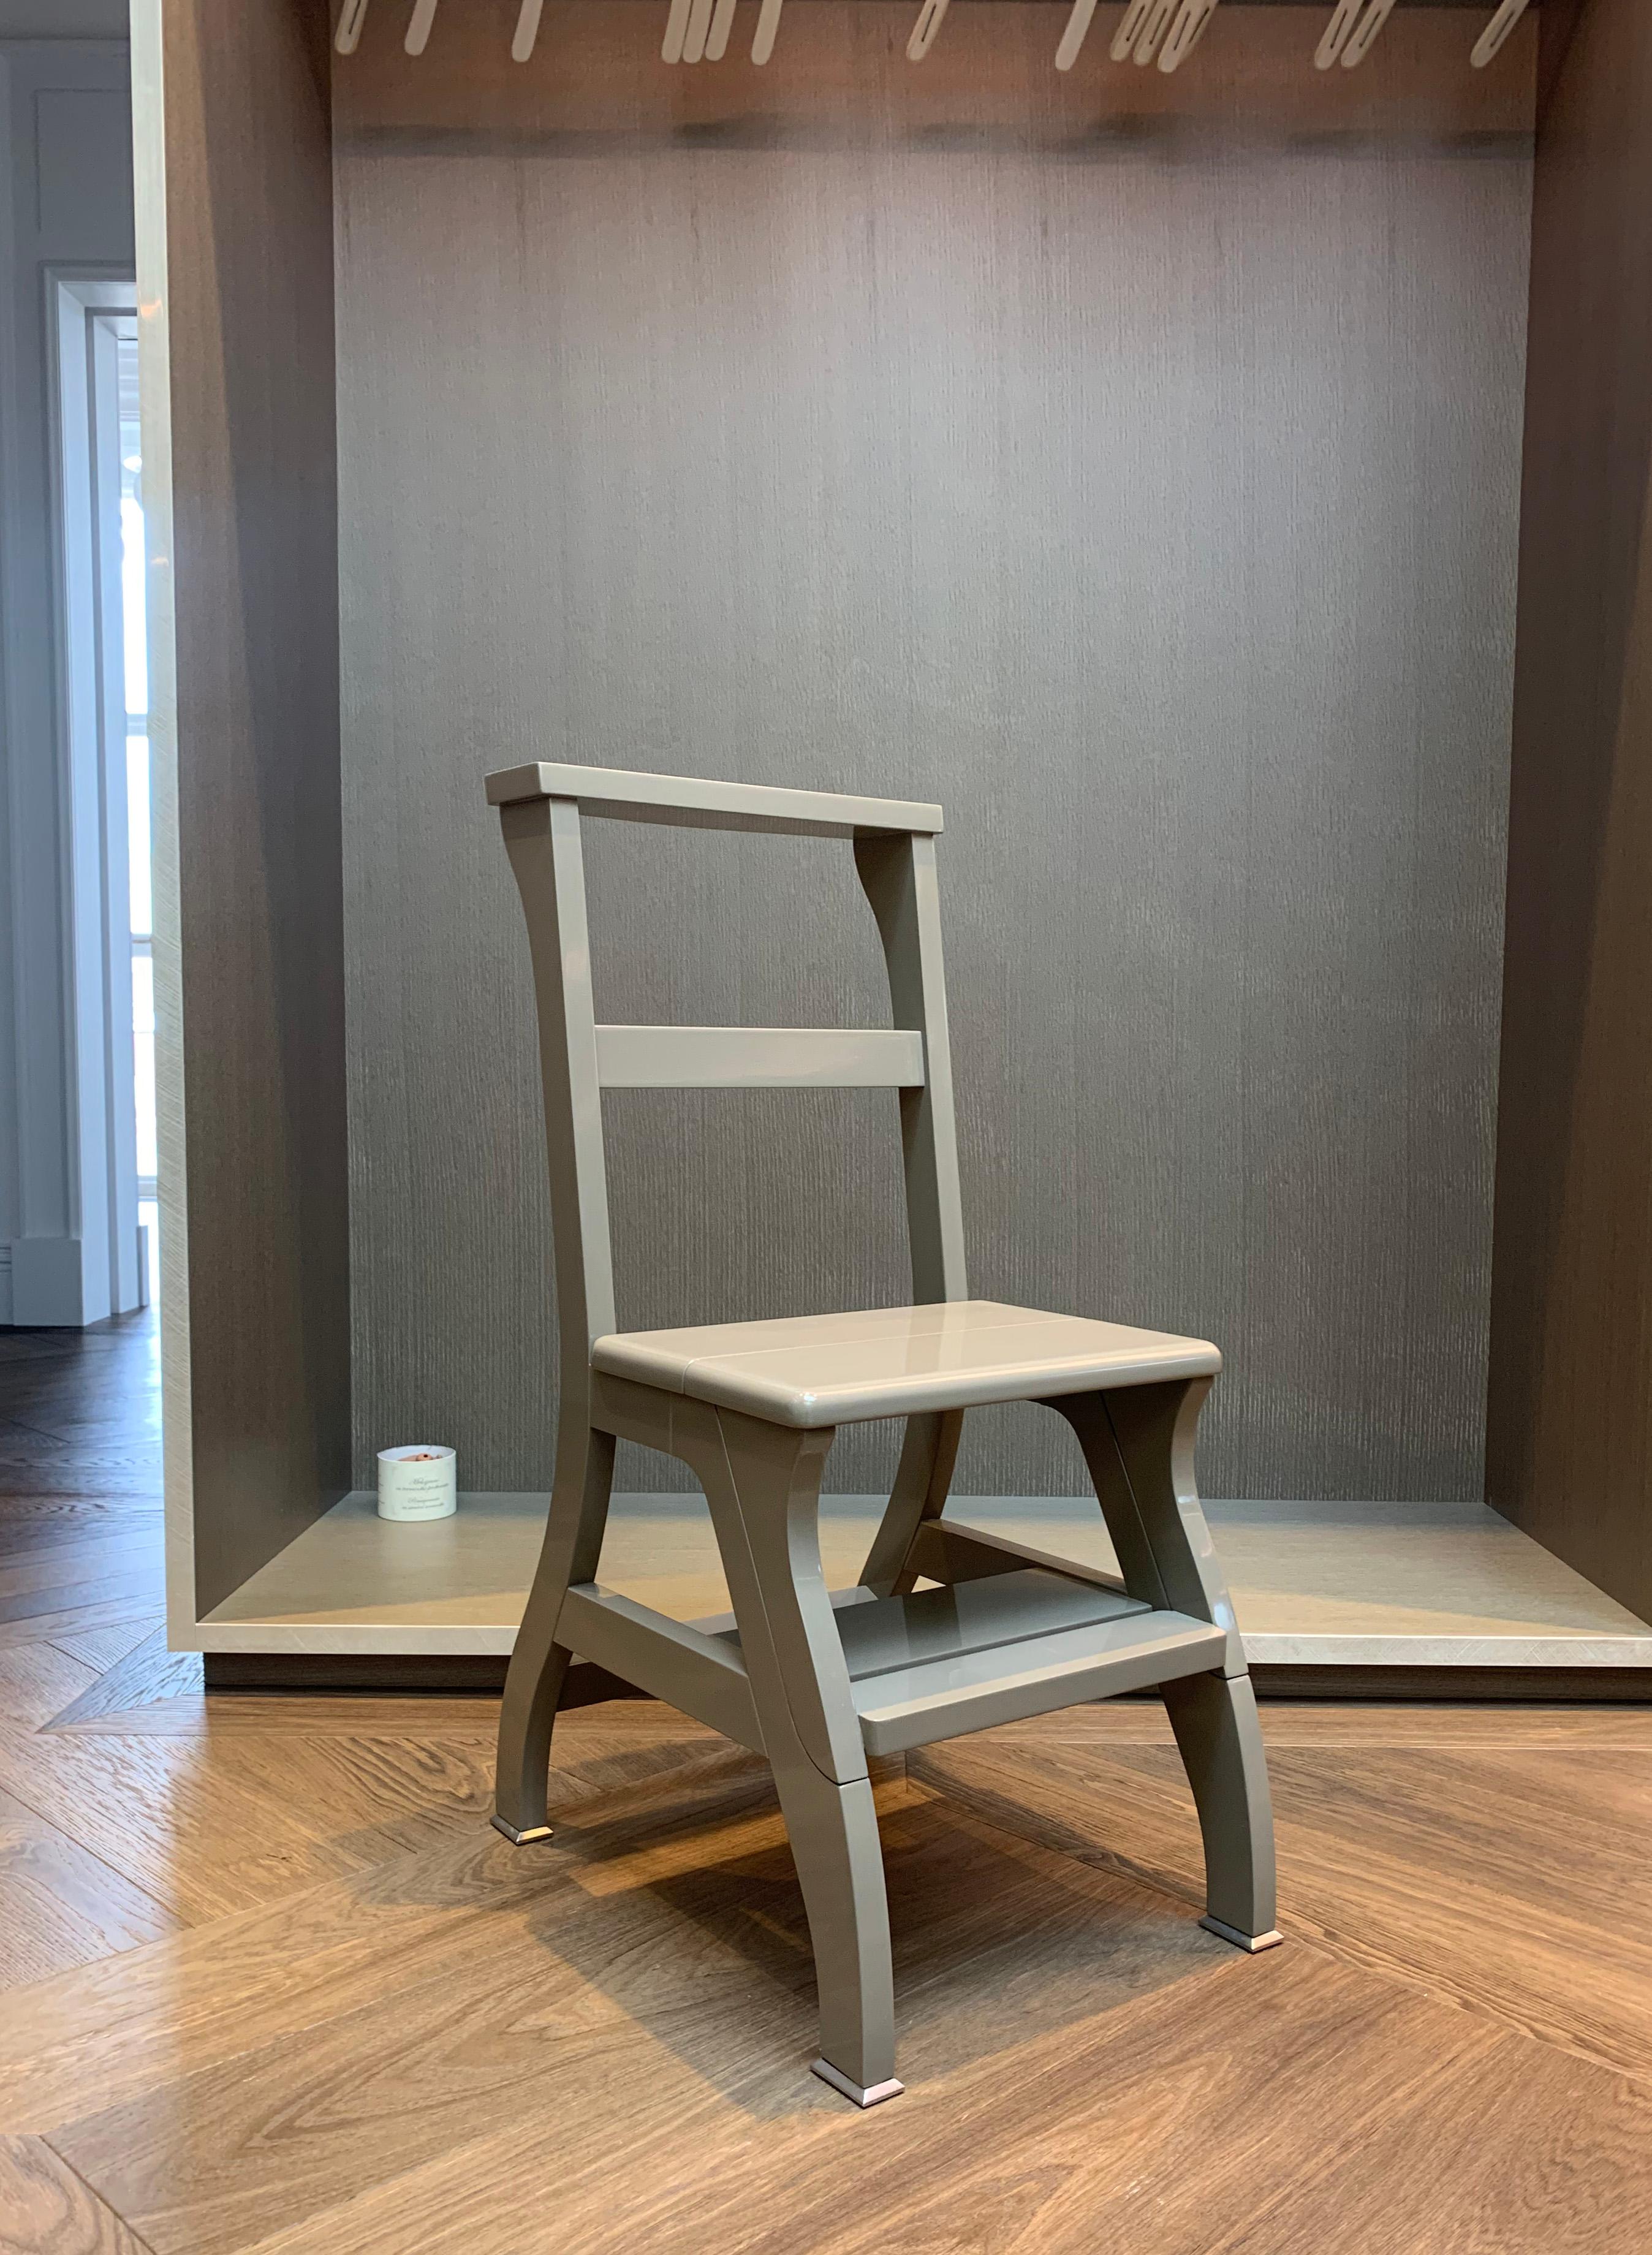 Grey lacquered Ladder chair by Promemoria - A marriage of function and form come together and births ‘Rebecca’ 

The Rebecca Chair is a convertible ladder-chair that condenses two essential functions: chair and ladder.

It's made by the